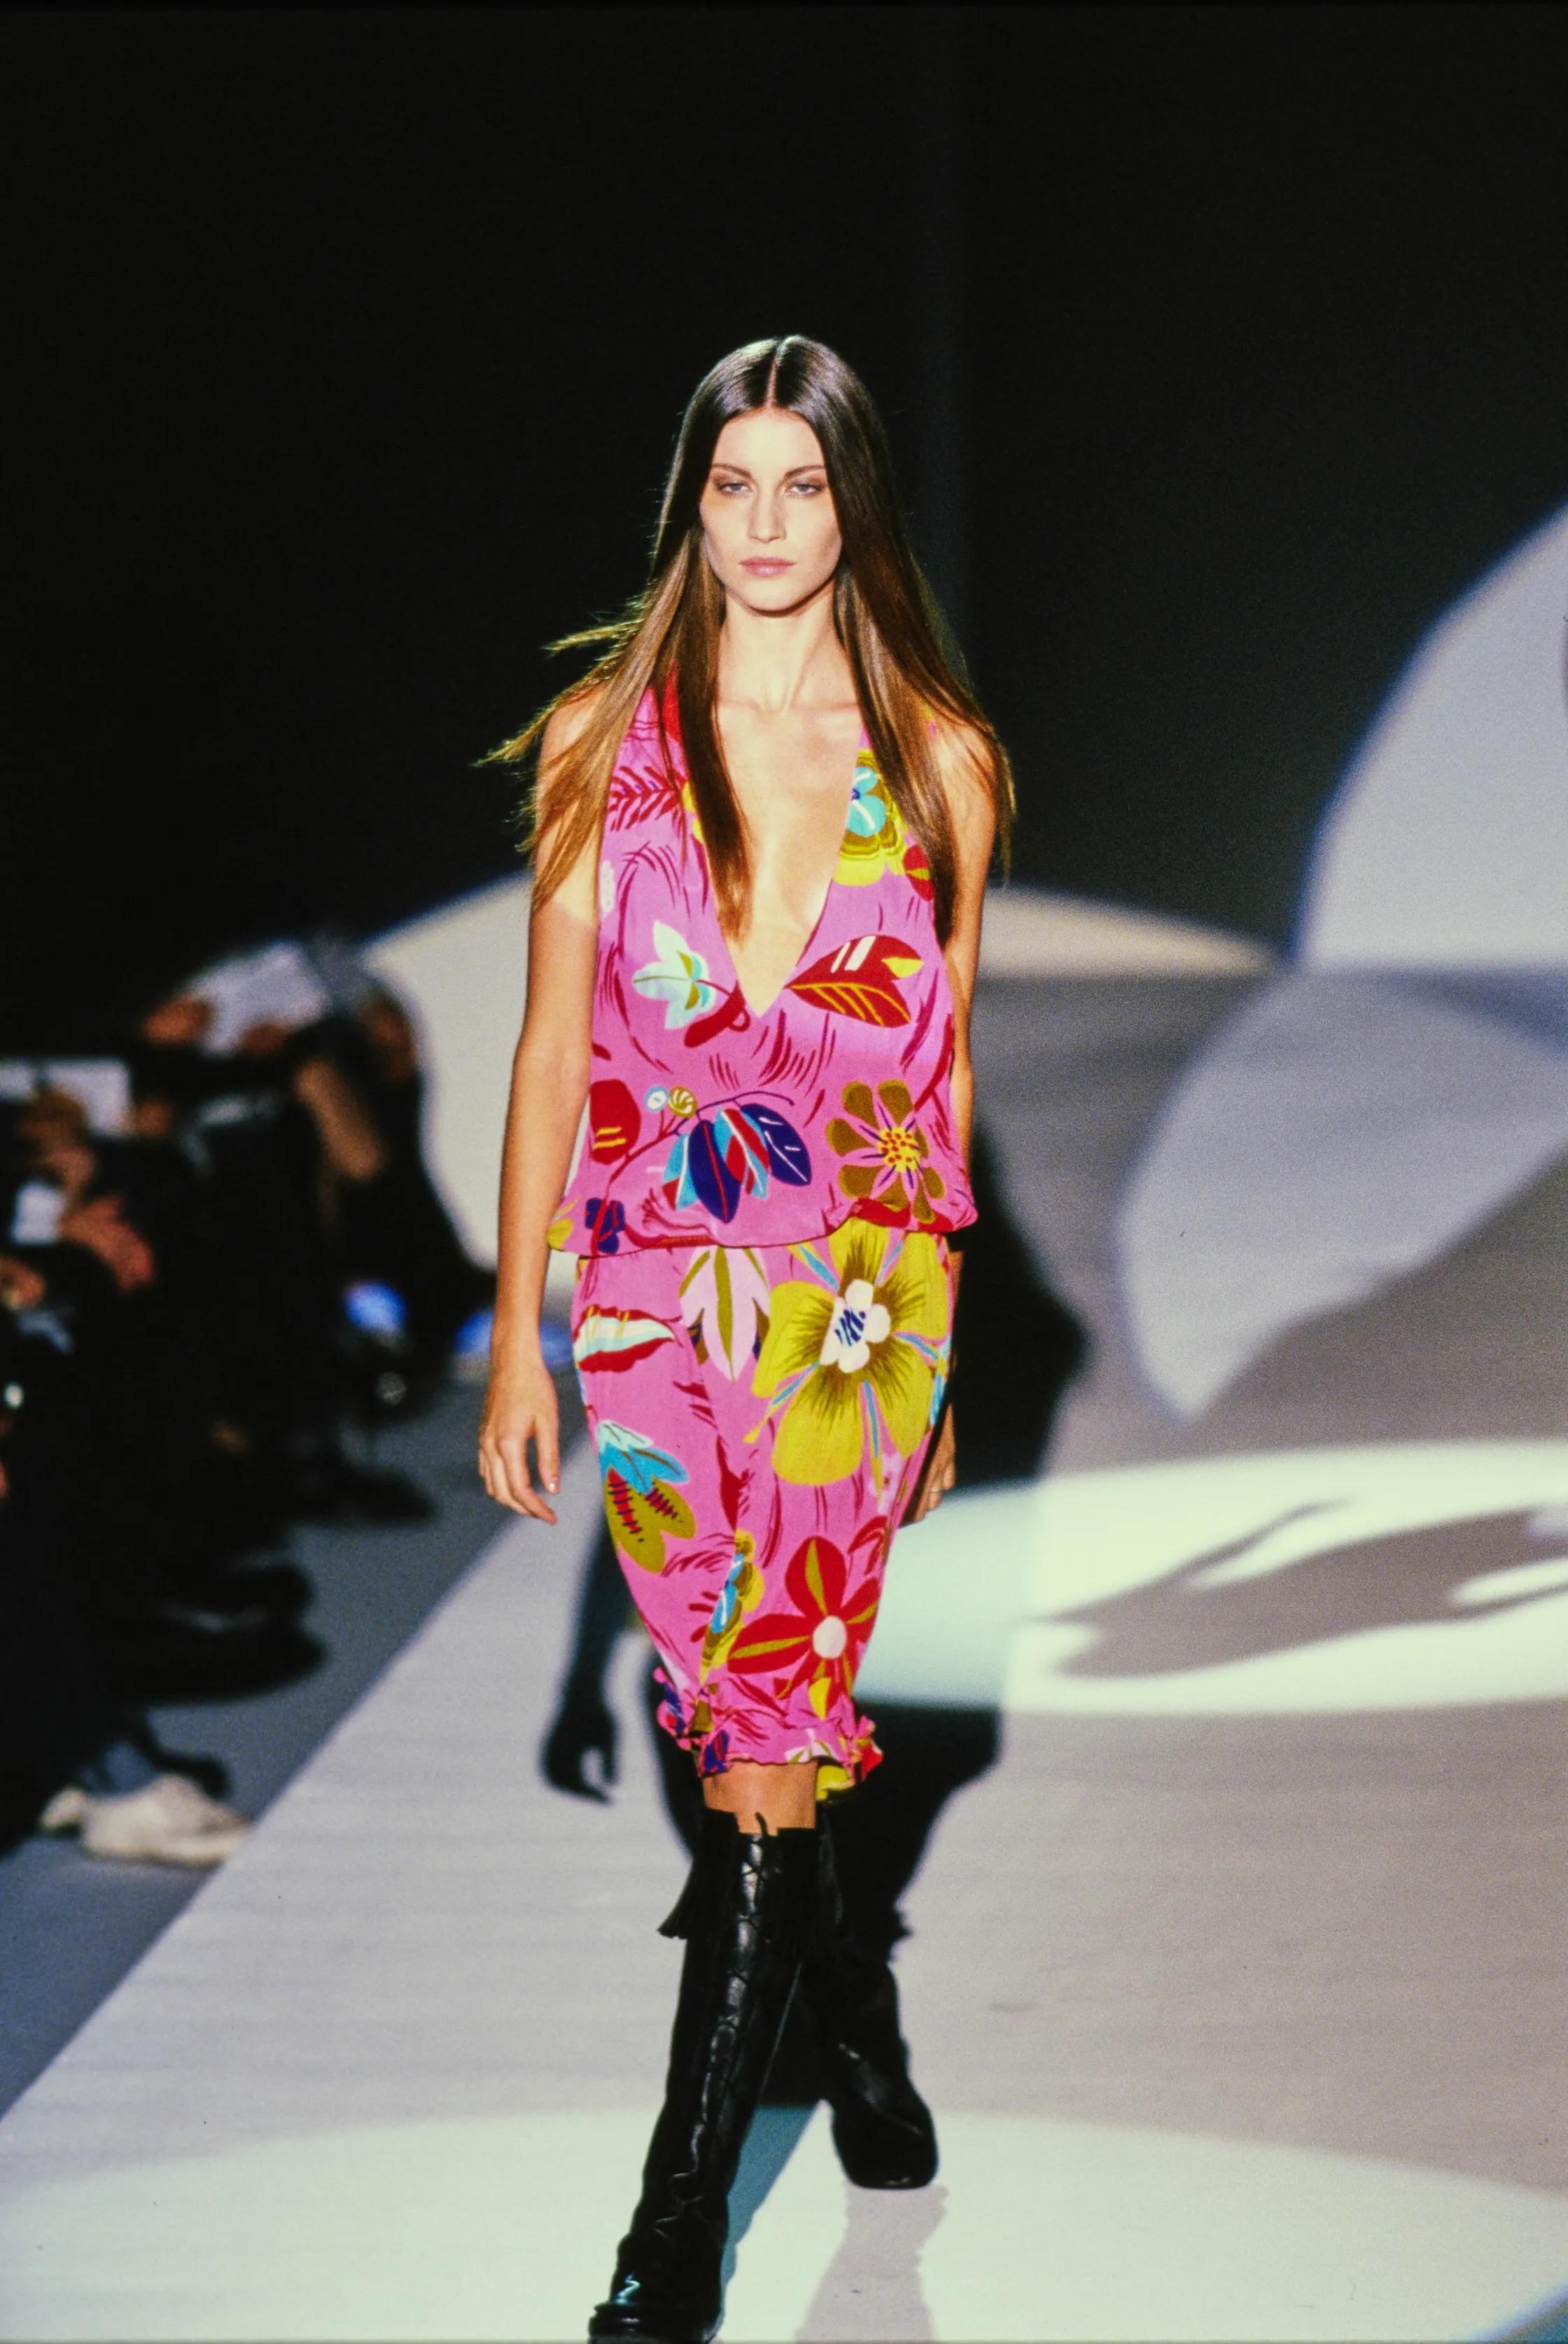 Presenting a fabulous bright pink floral print Gucci skirt, designed by Tom Ford. This dress, part of the Spring/Summer 1999 collection, features the 'Acid Floral' design,  Tom Ford's reinterpretation of Gucci's  Accornero Flora print. It shares an